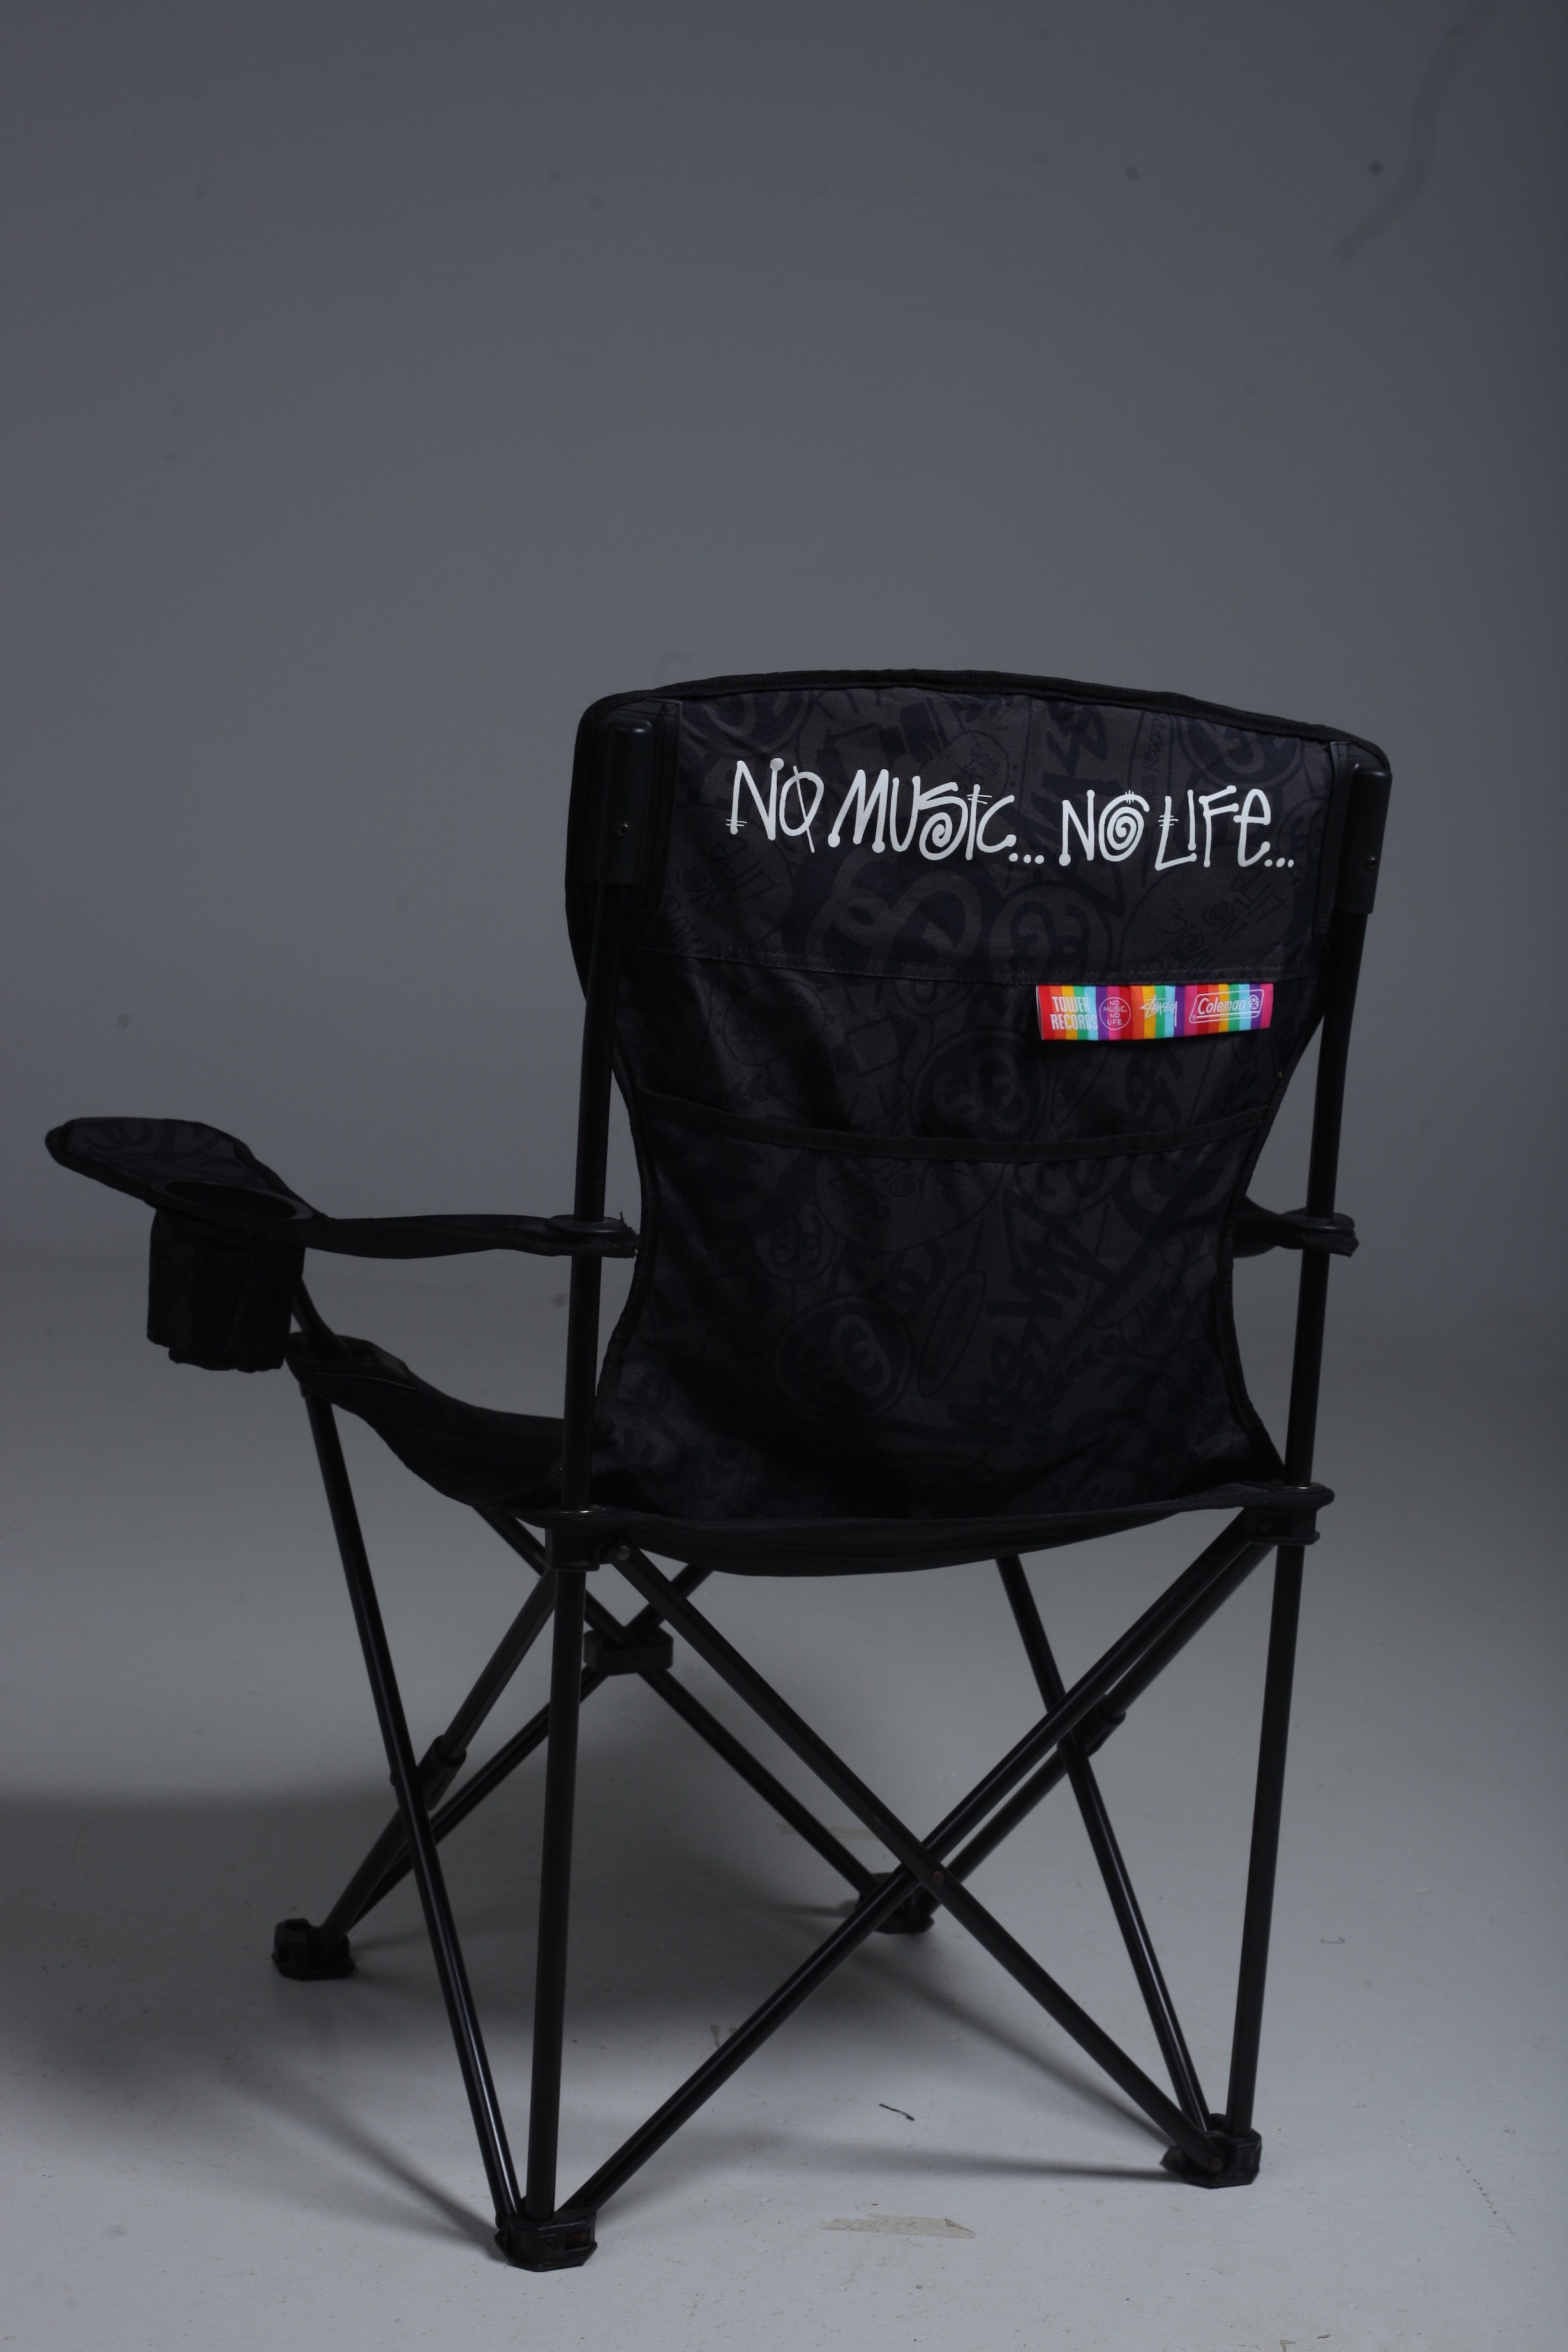 Stussy x Tower Records x Coleman Camping Chair